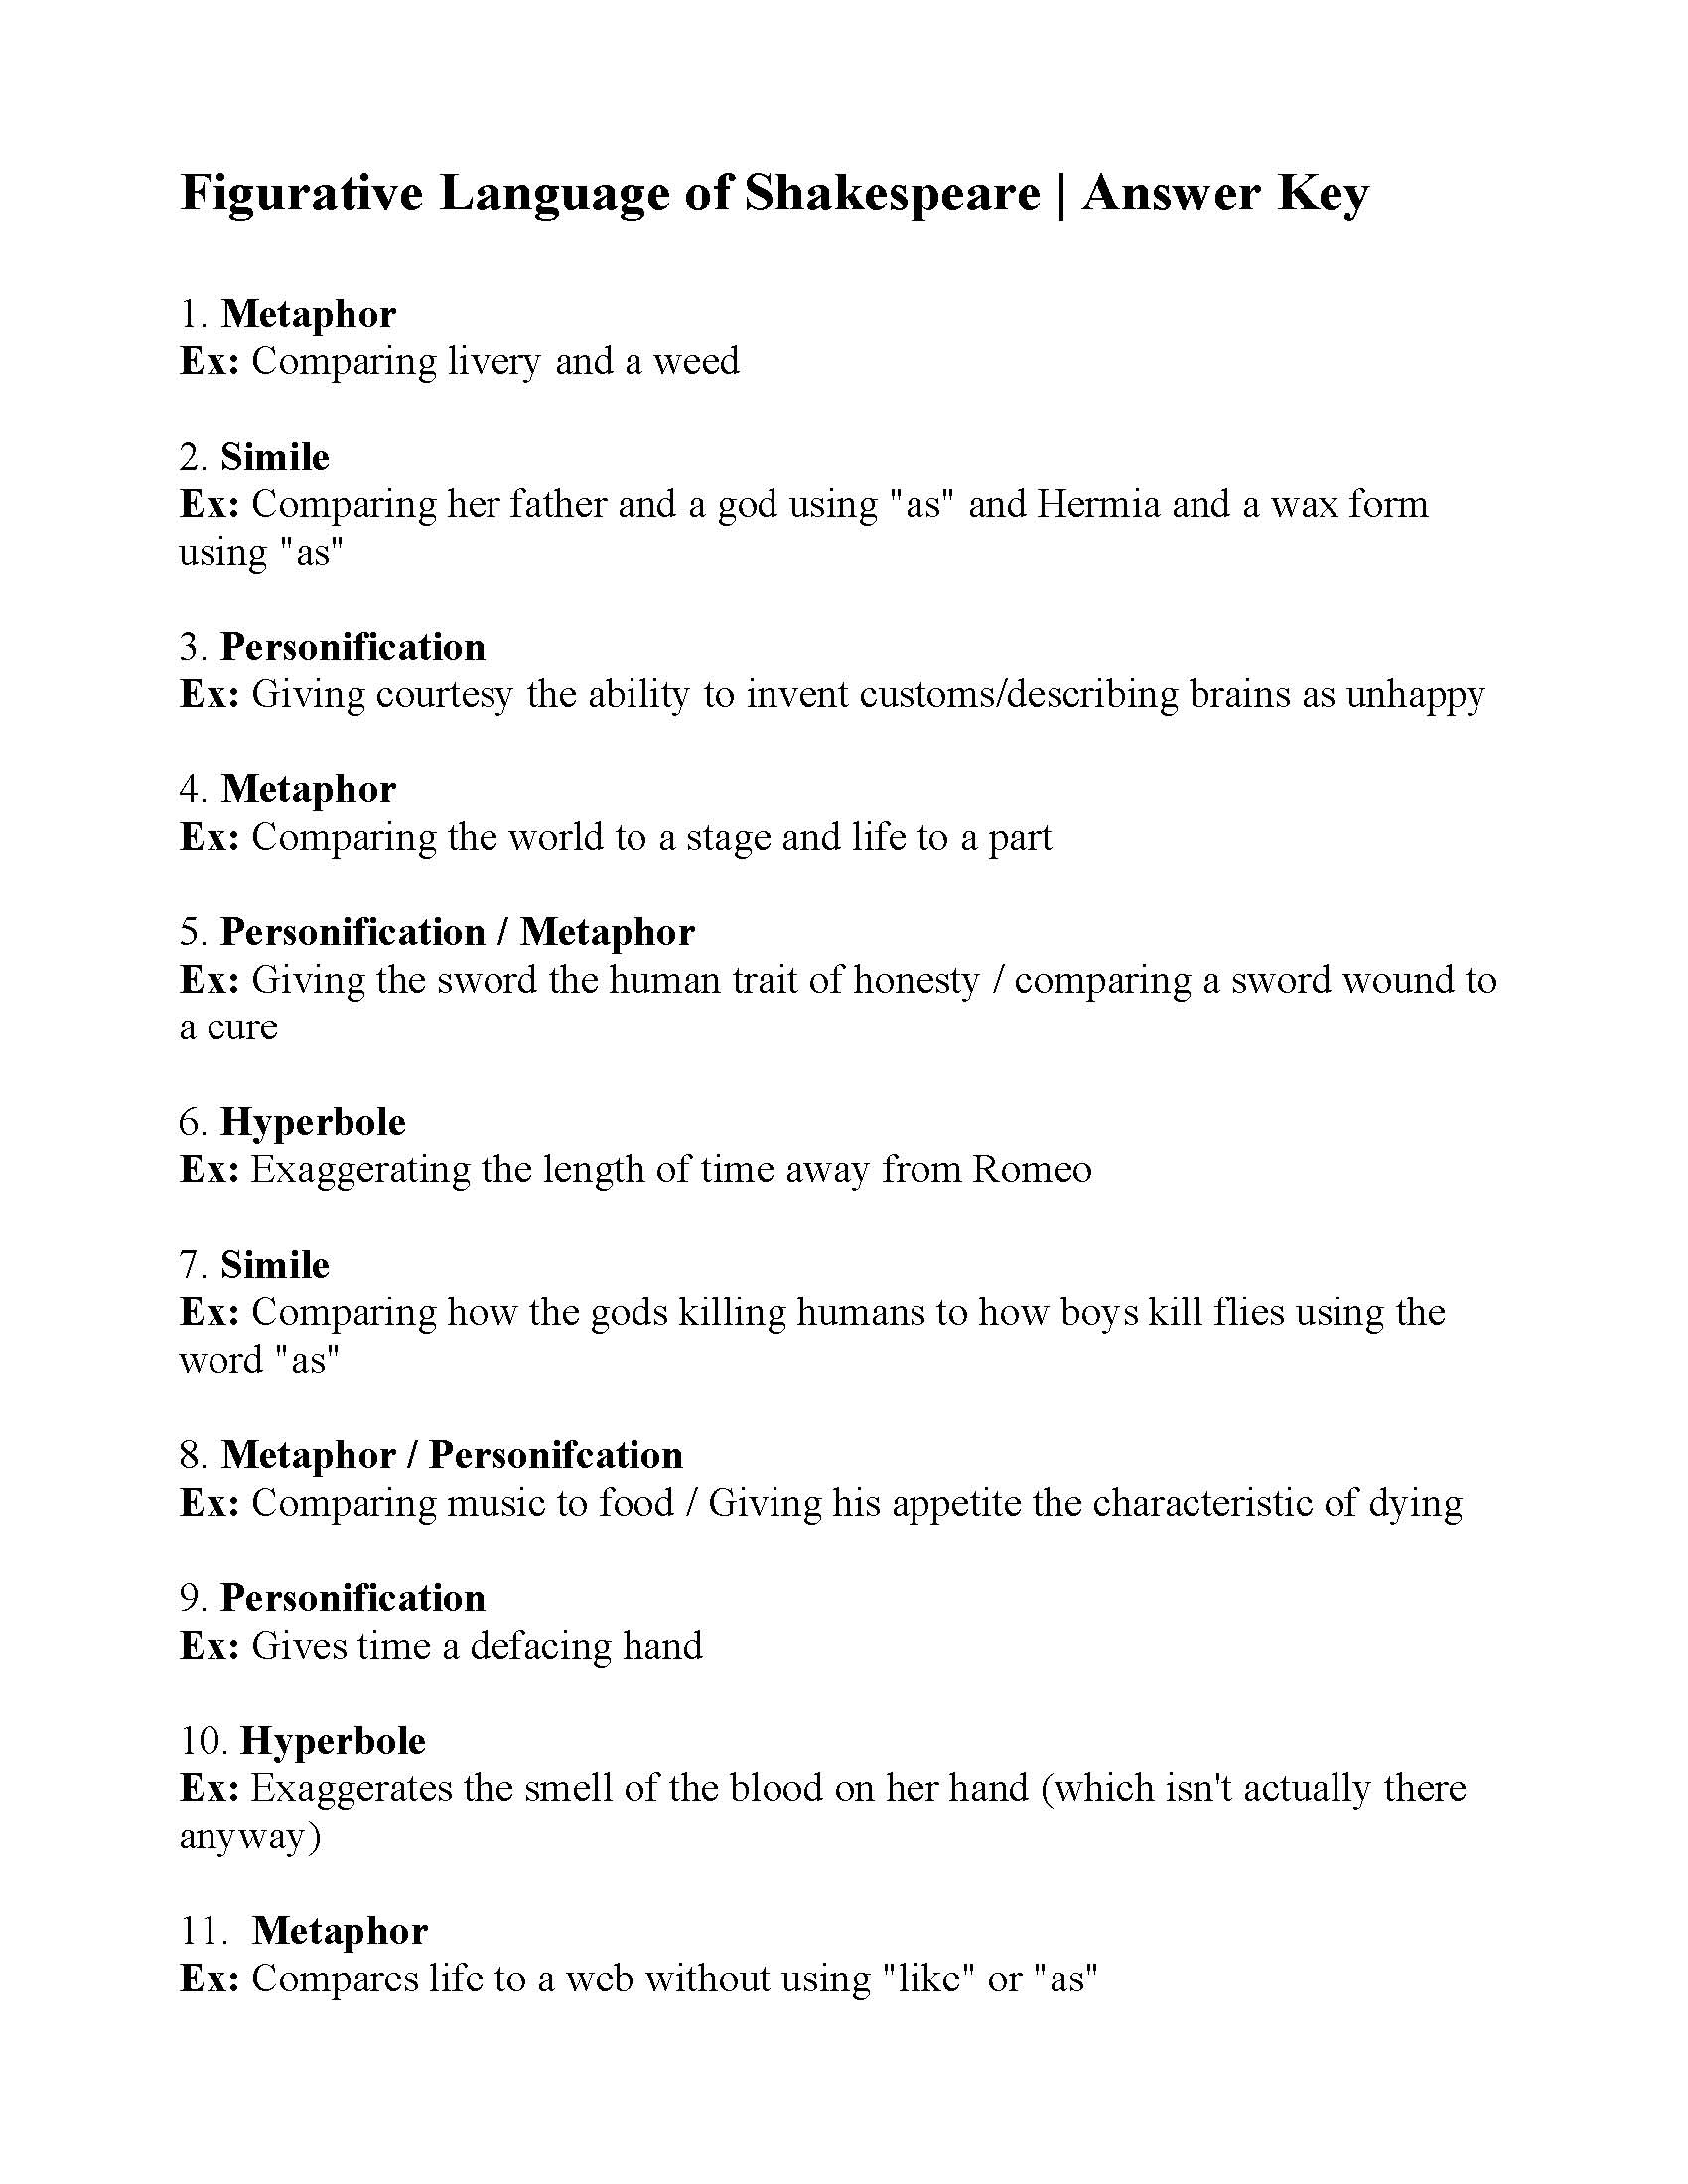 This is a preview image of Figurative Language of Shakespeare. Click on it to enlarge it or view the source file.